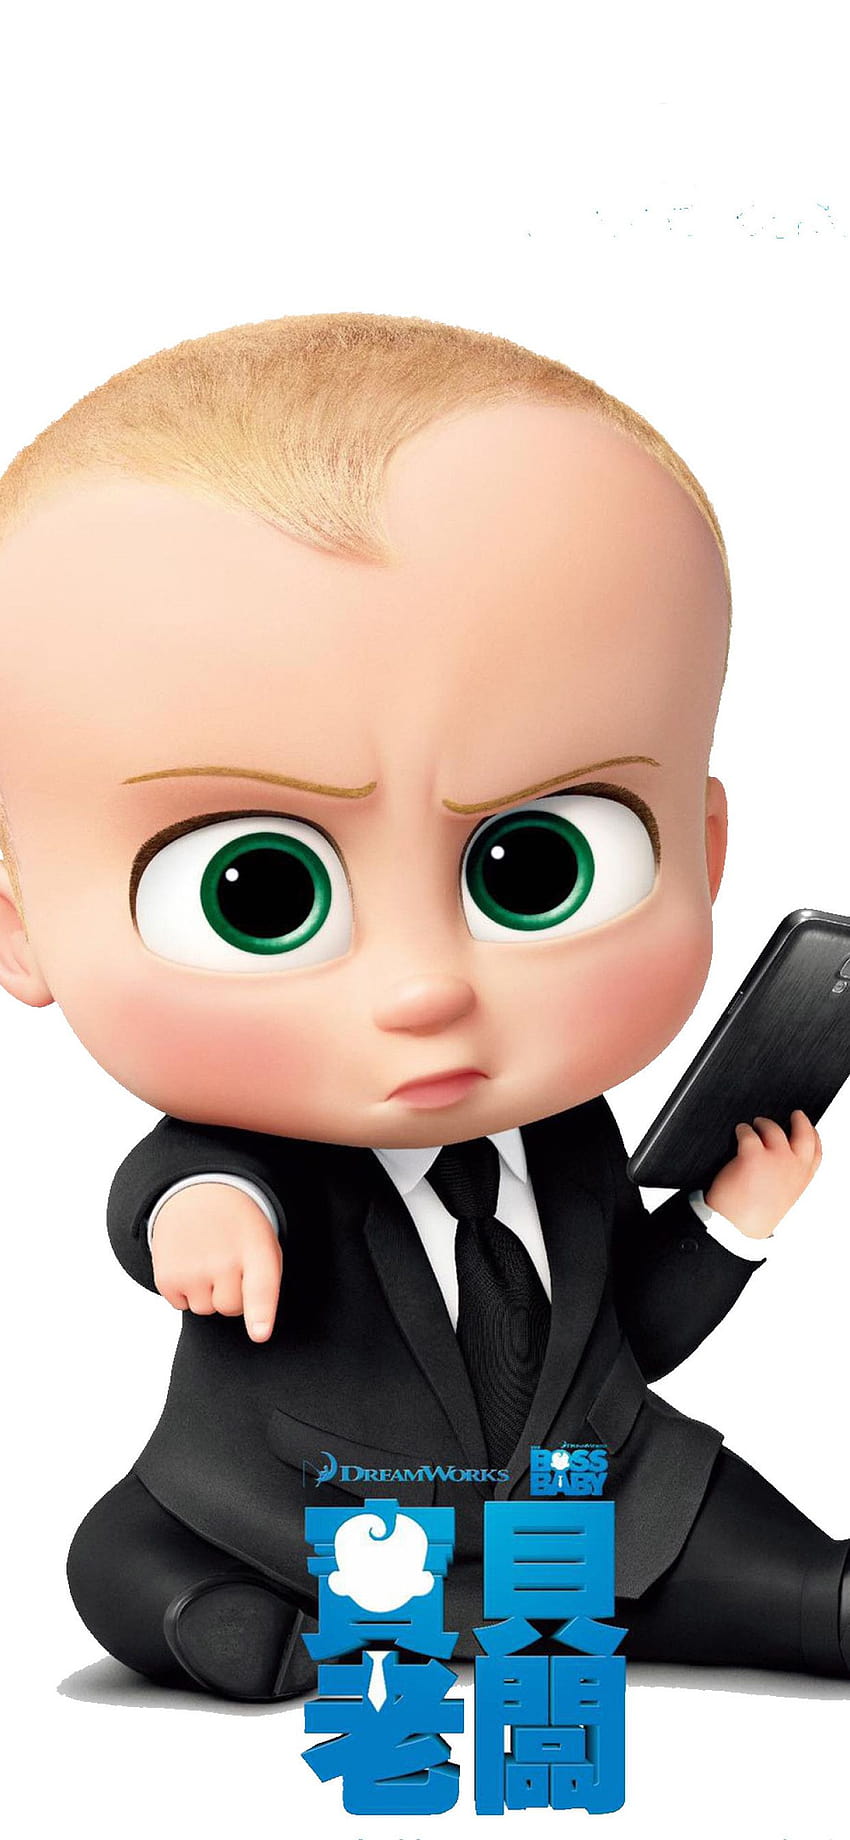 1242x2688 The Boss Baby Dreamworks Iphone XS MAX, baby mobile HD phone wallpaper